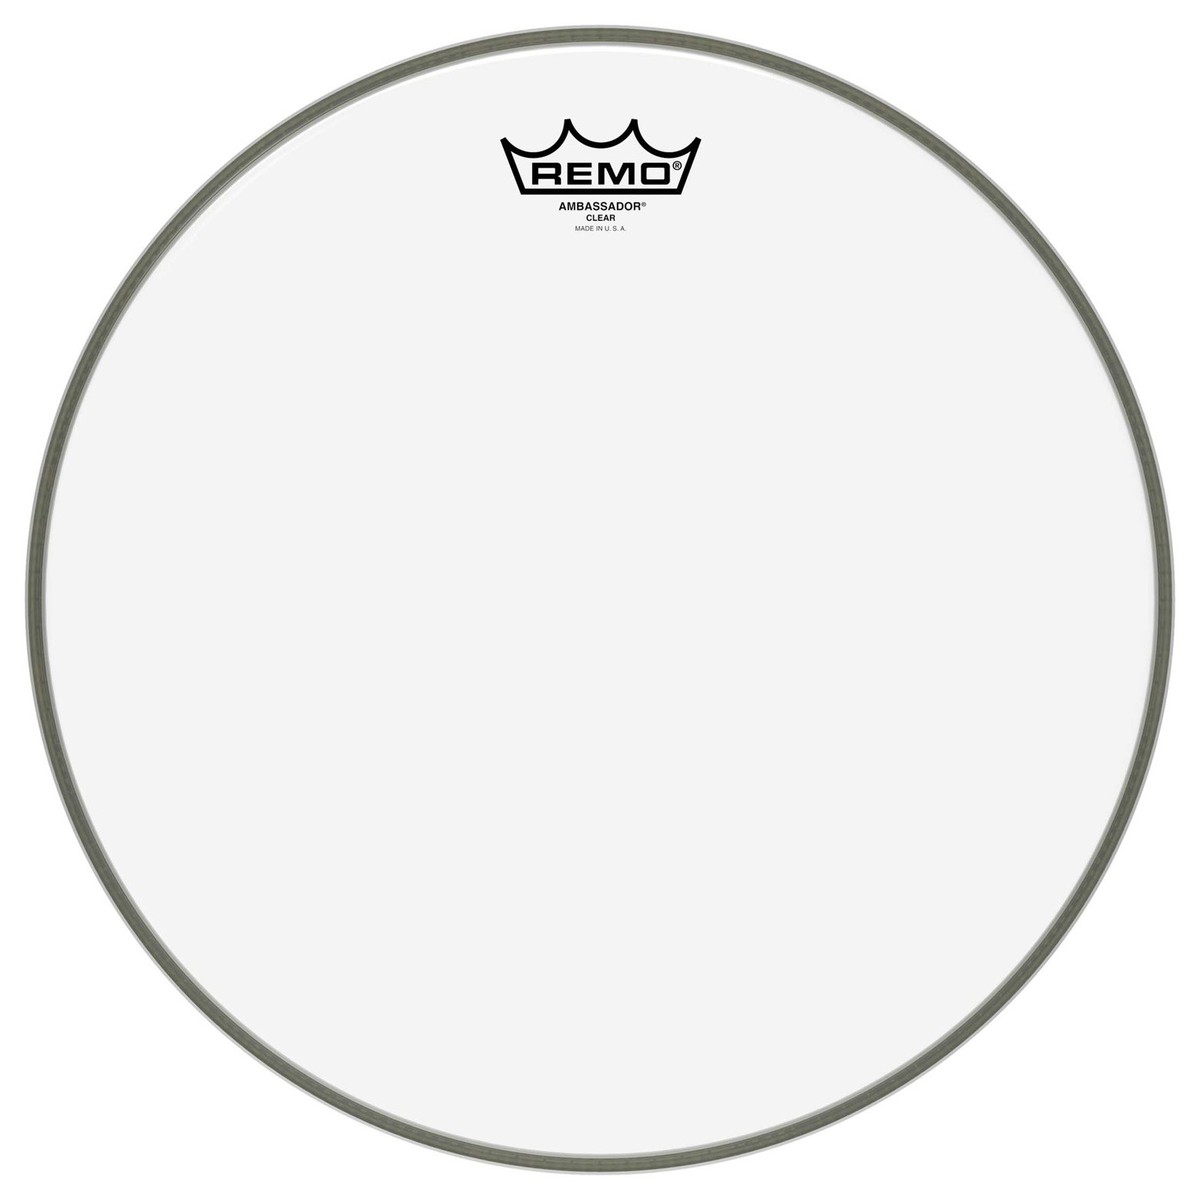 An image of Remo Ambassador Clear Drumhead 6" | PMT Online